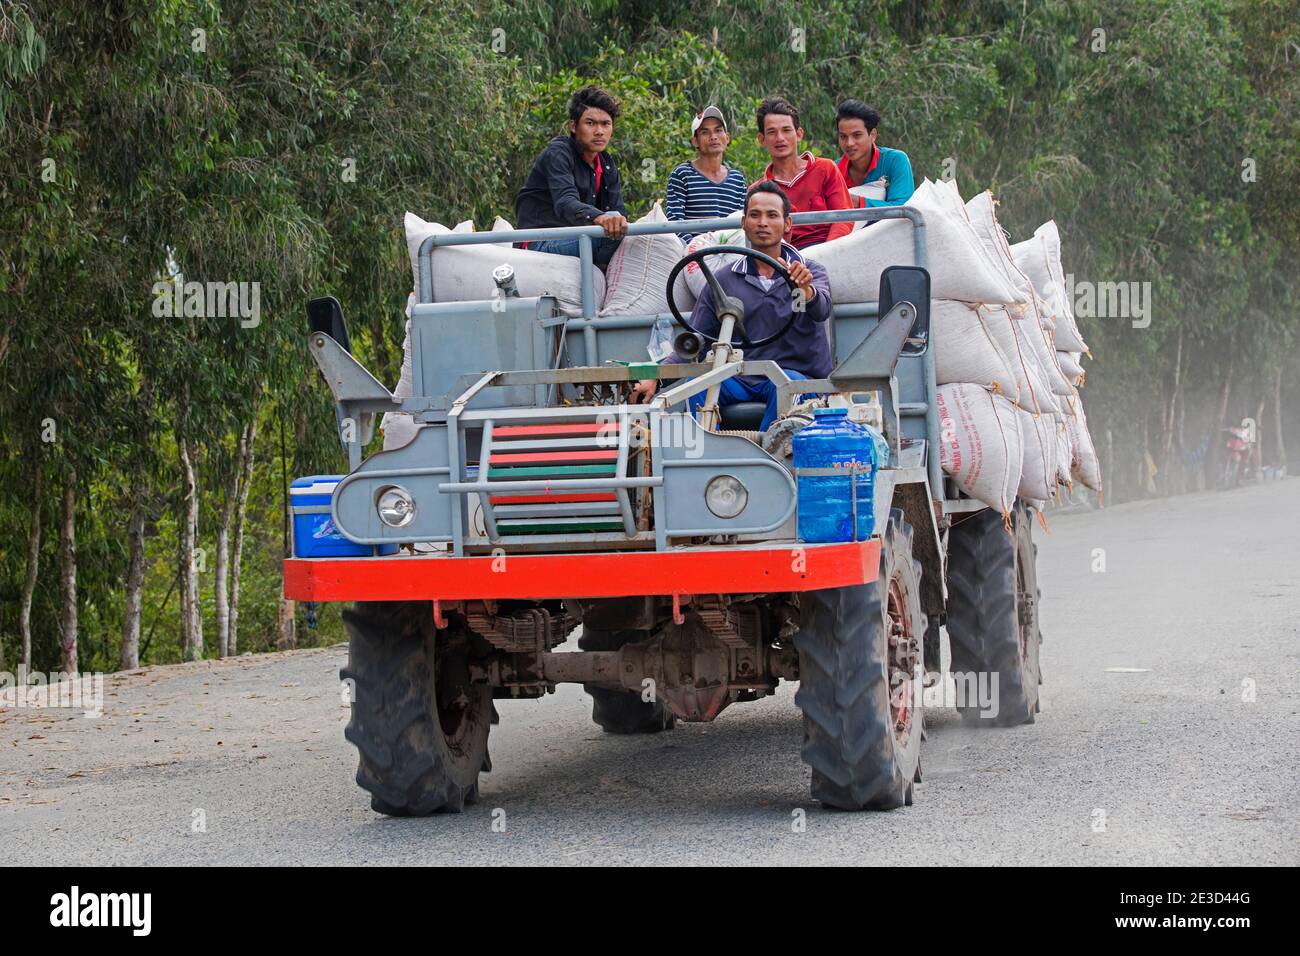 Primitive truck for transporting rice workers and bags of rice in the Tra Su Cajuput Forest, Tinh Bien, An Giang Province in the Mekong Delta, Vietnam Stock Photo